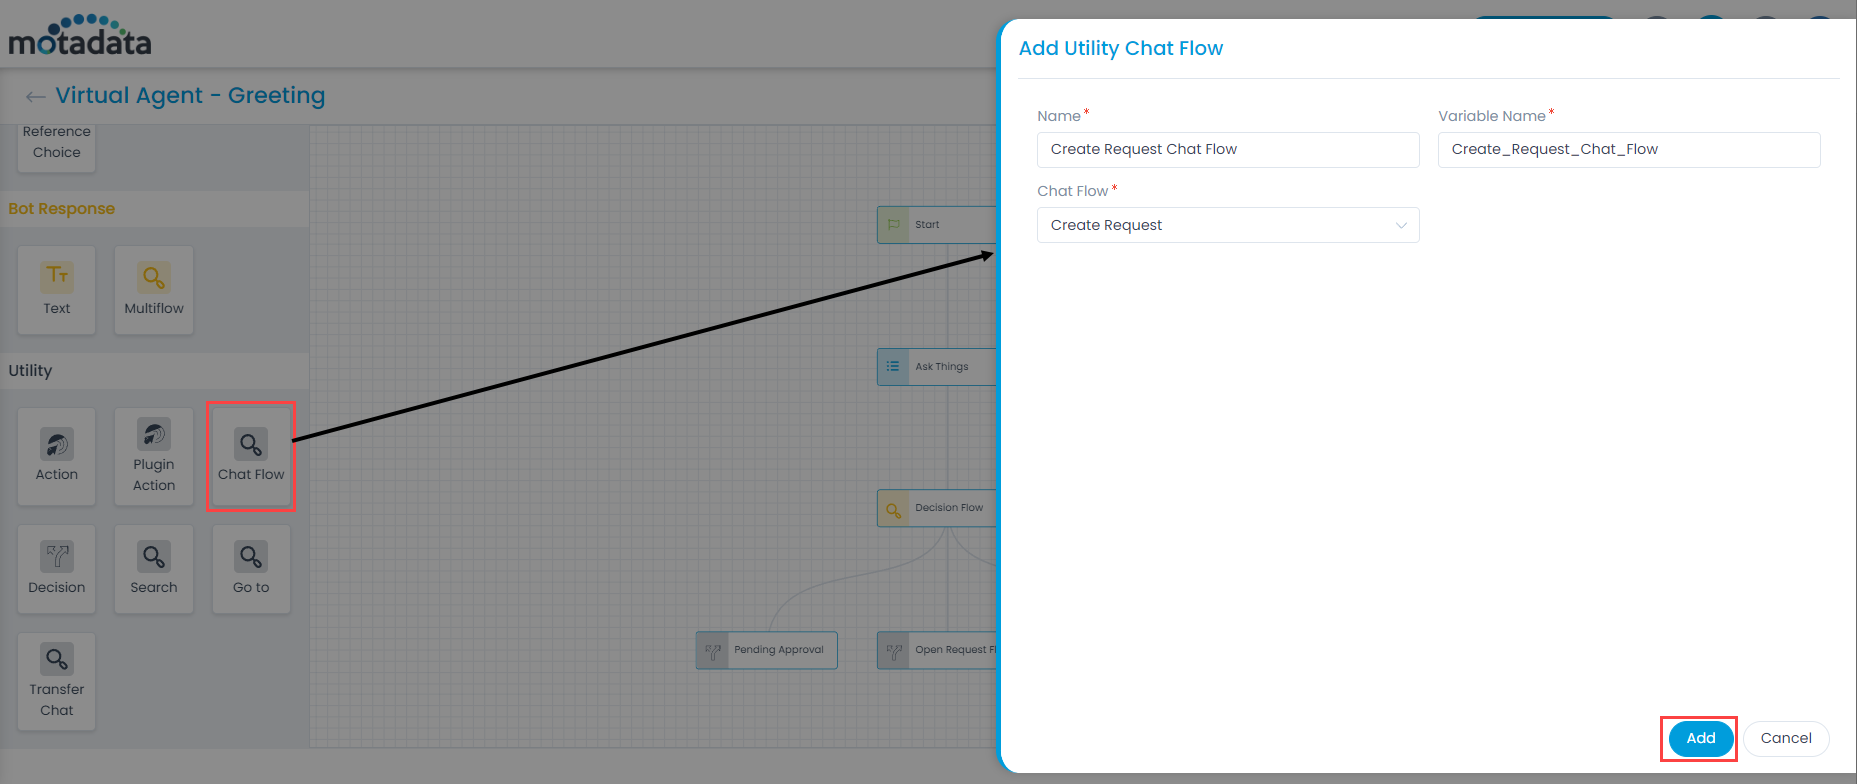 Adding Chat Flow Utility